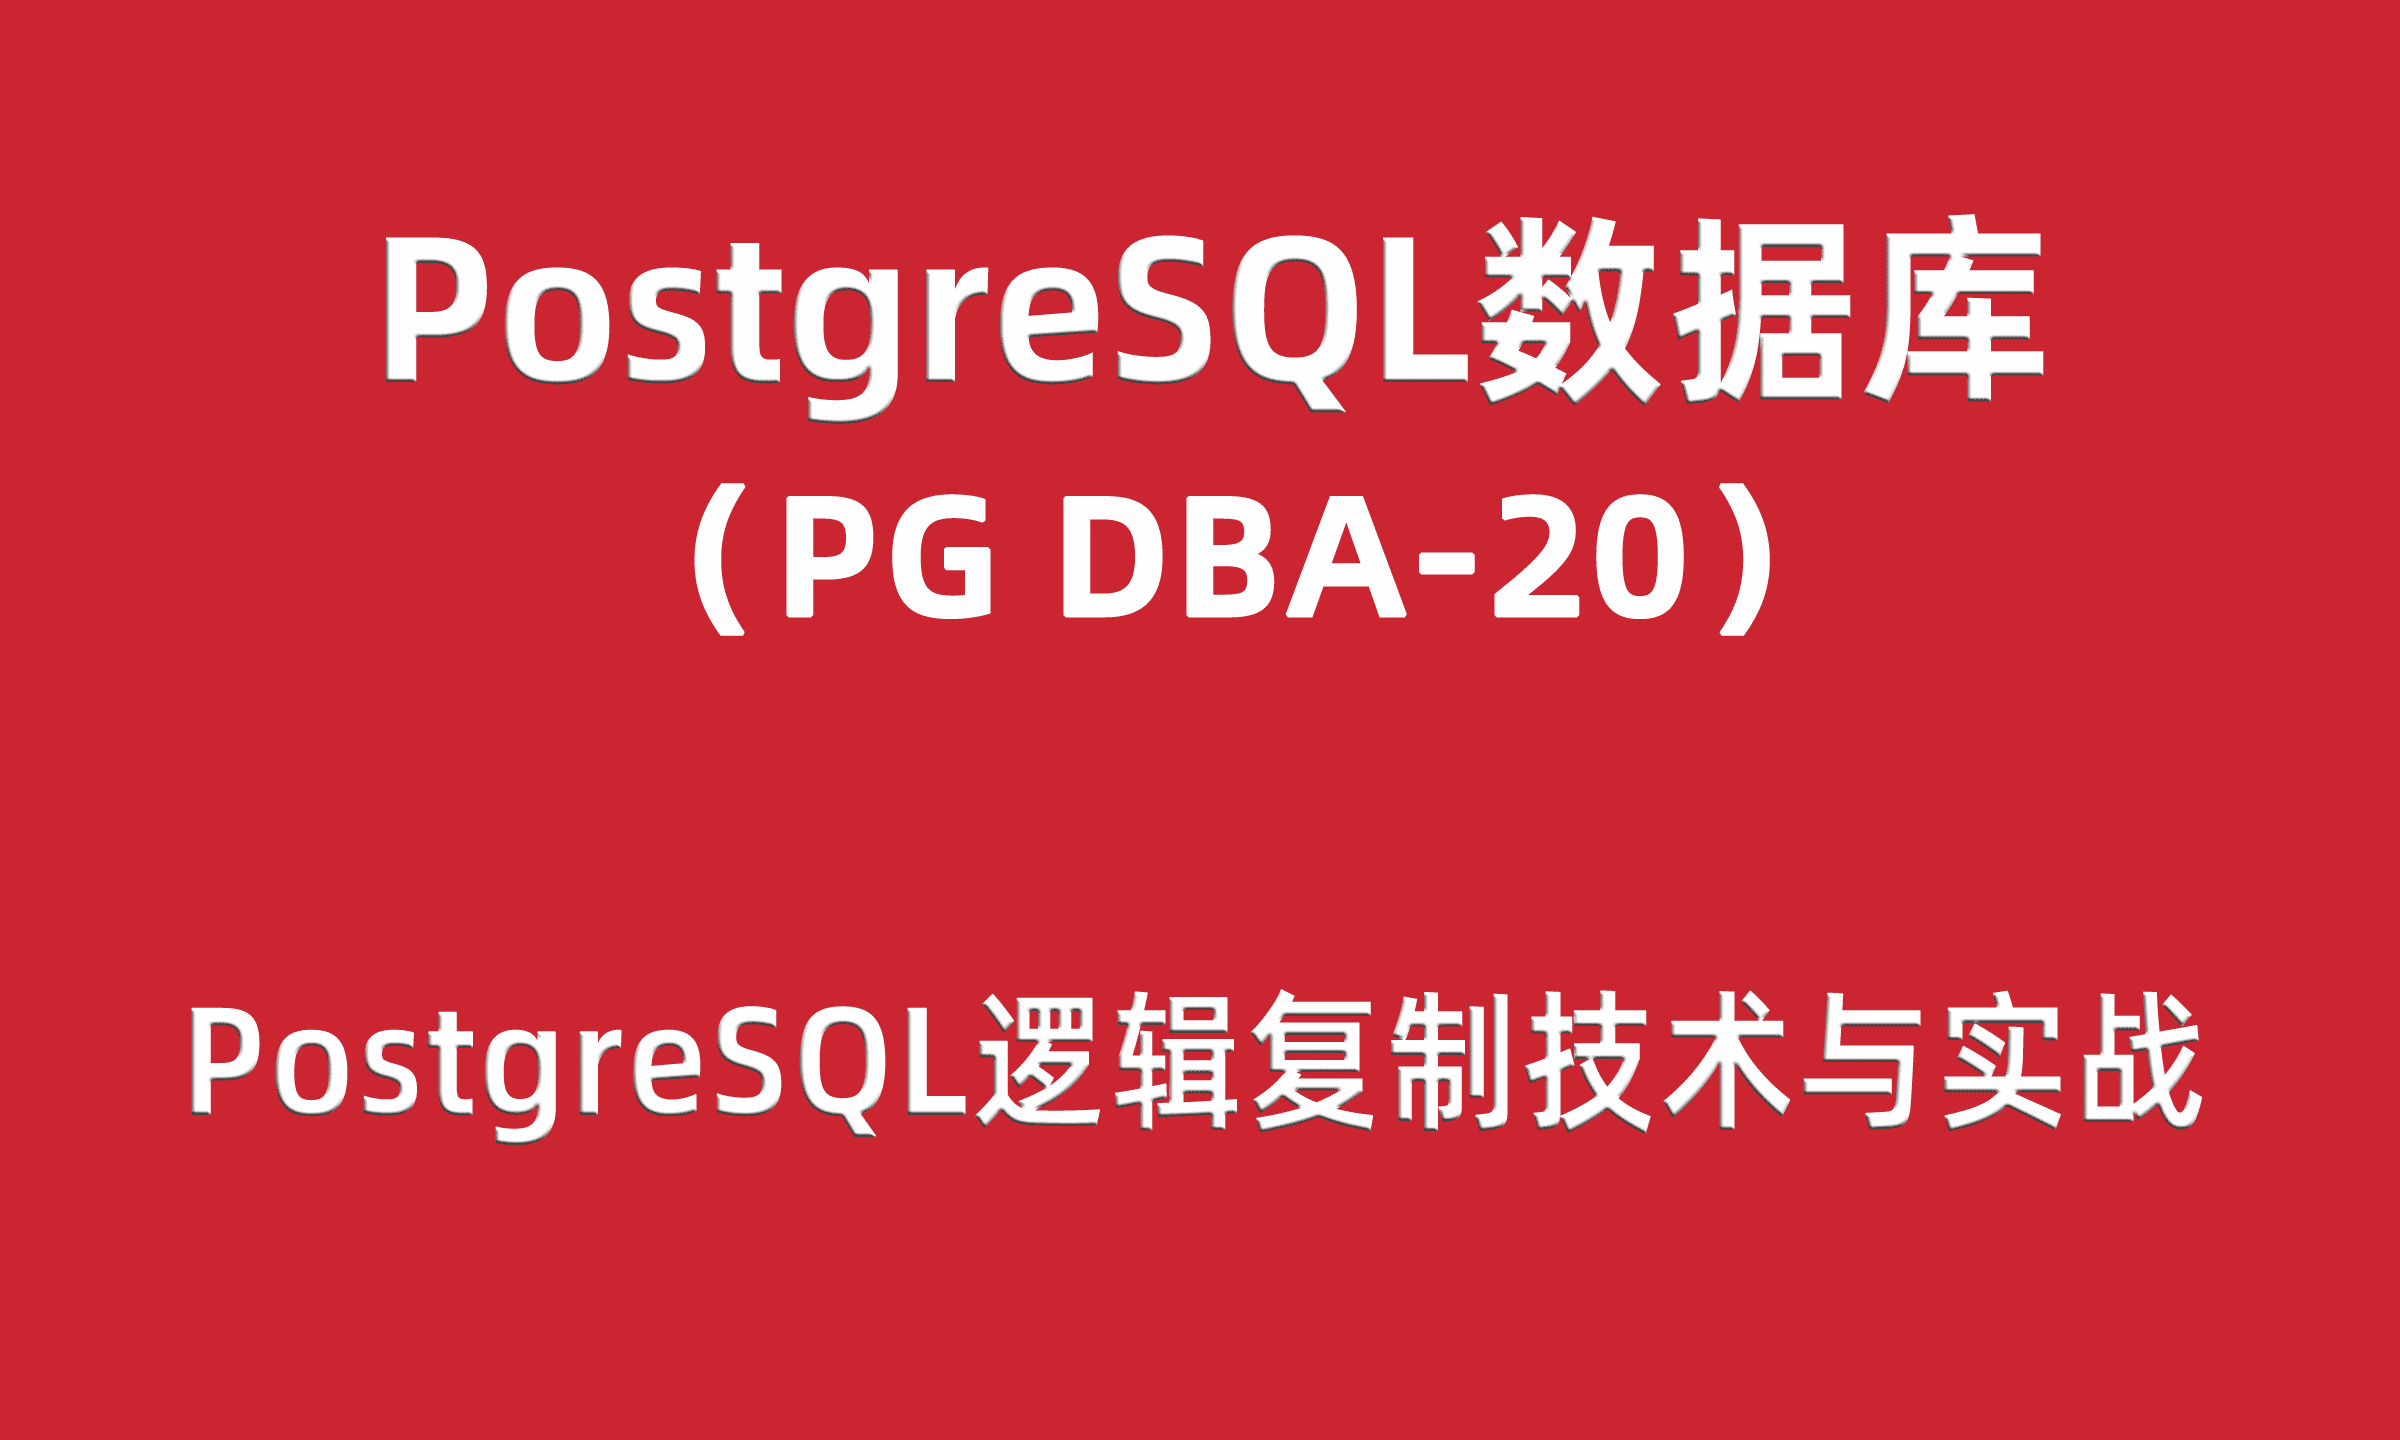  PG-DBA training 20: PostgreSQL logical replication technology and project practice